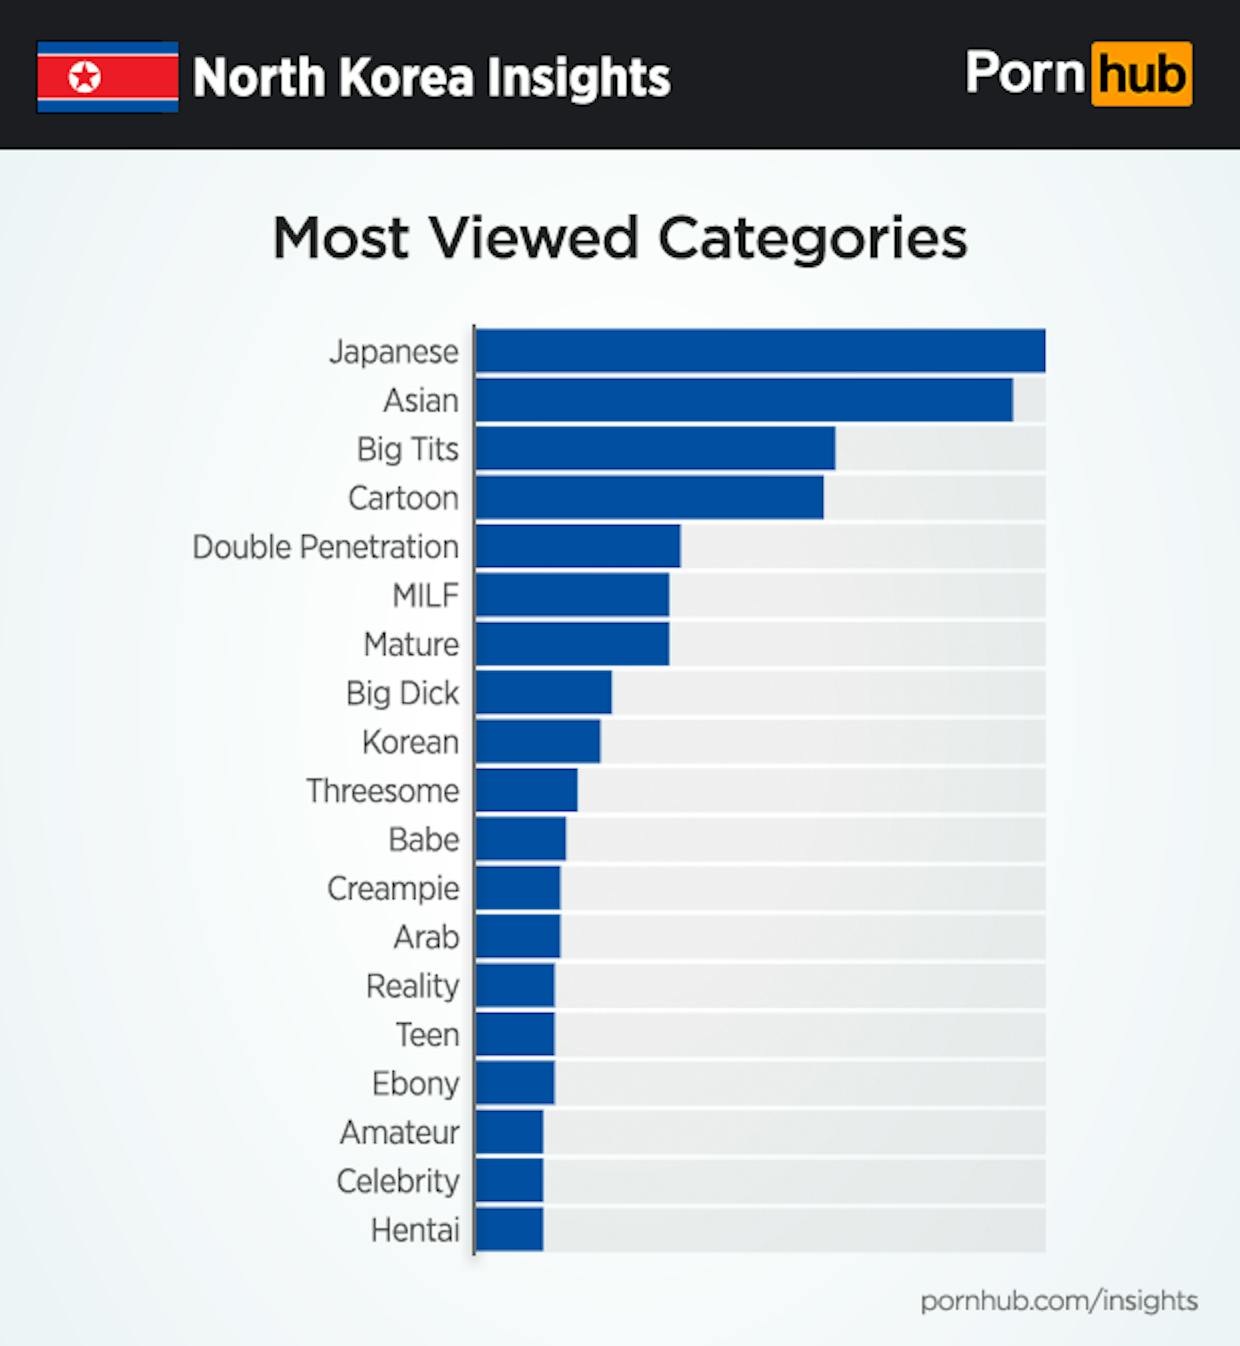 North Korea Gay Porn - Pornhub Just Released New Data on What North Koreans Watch ...